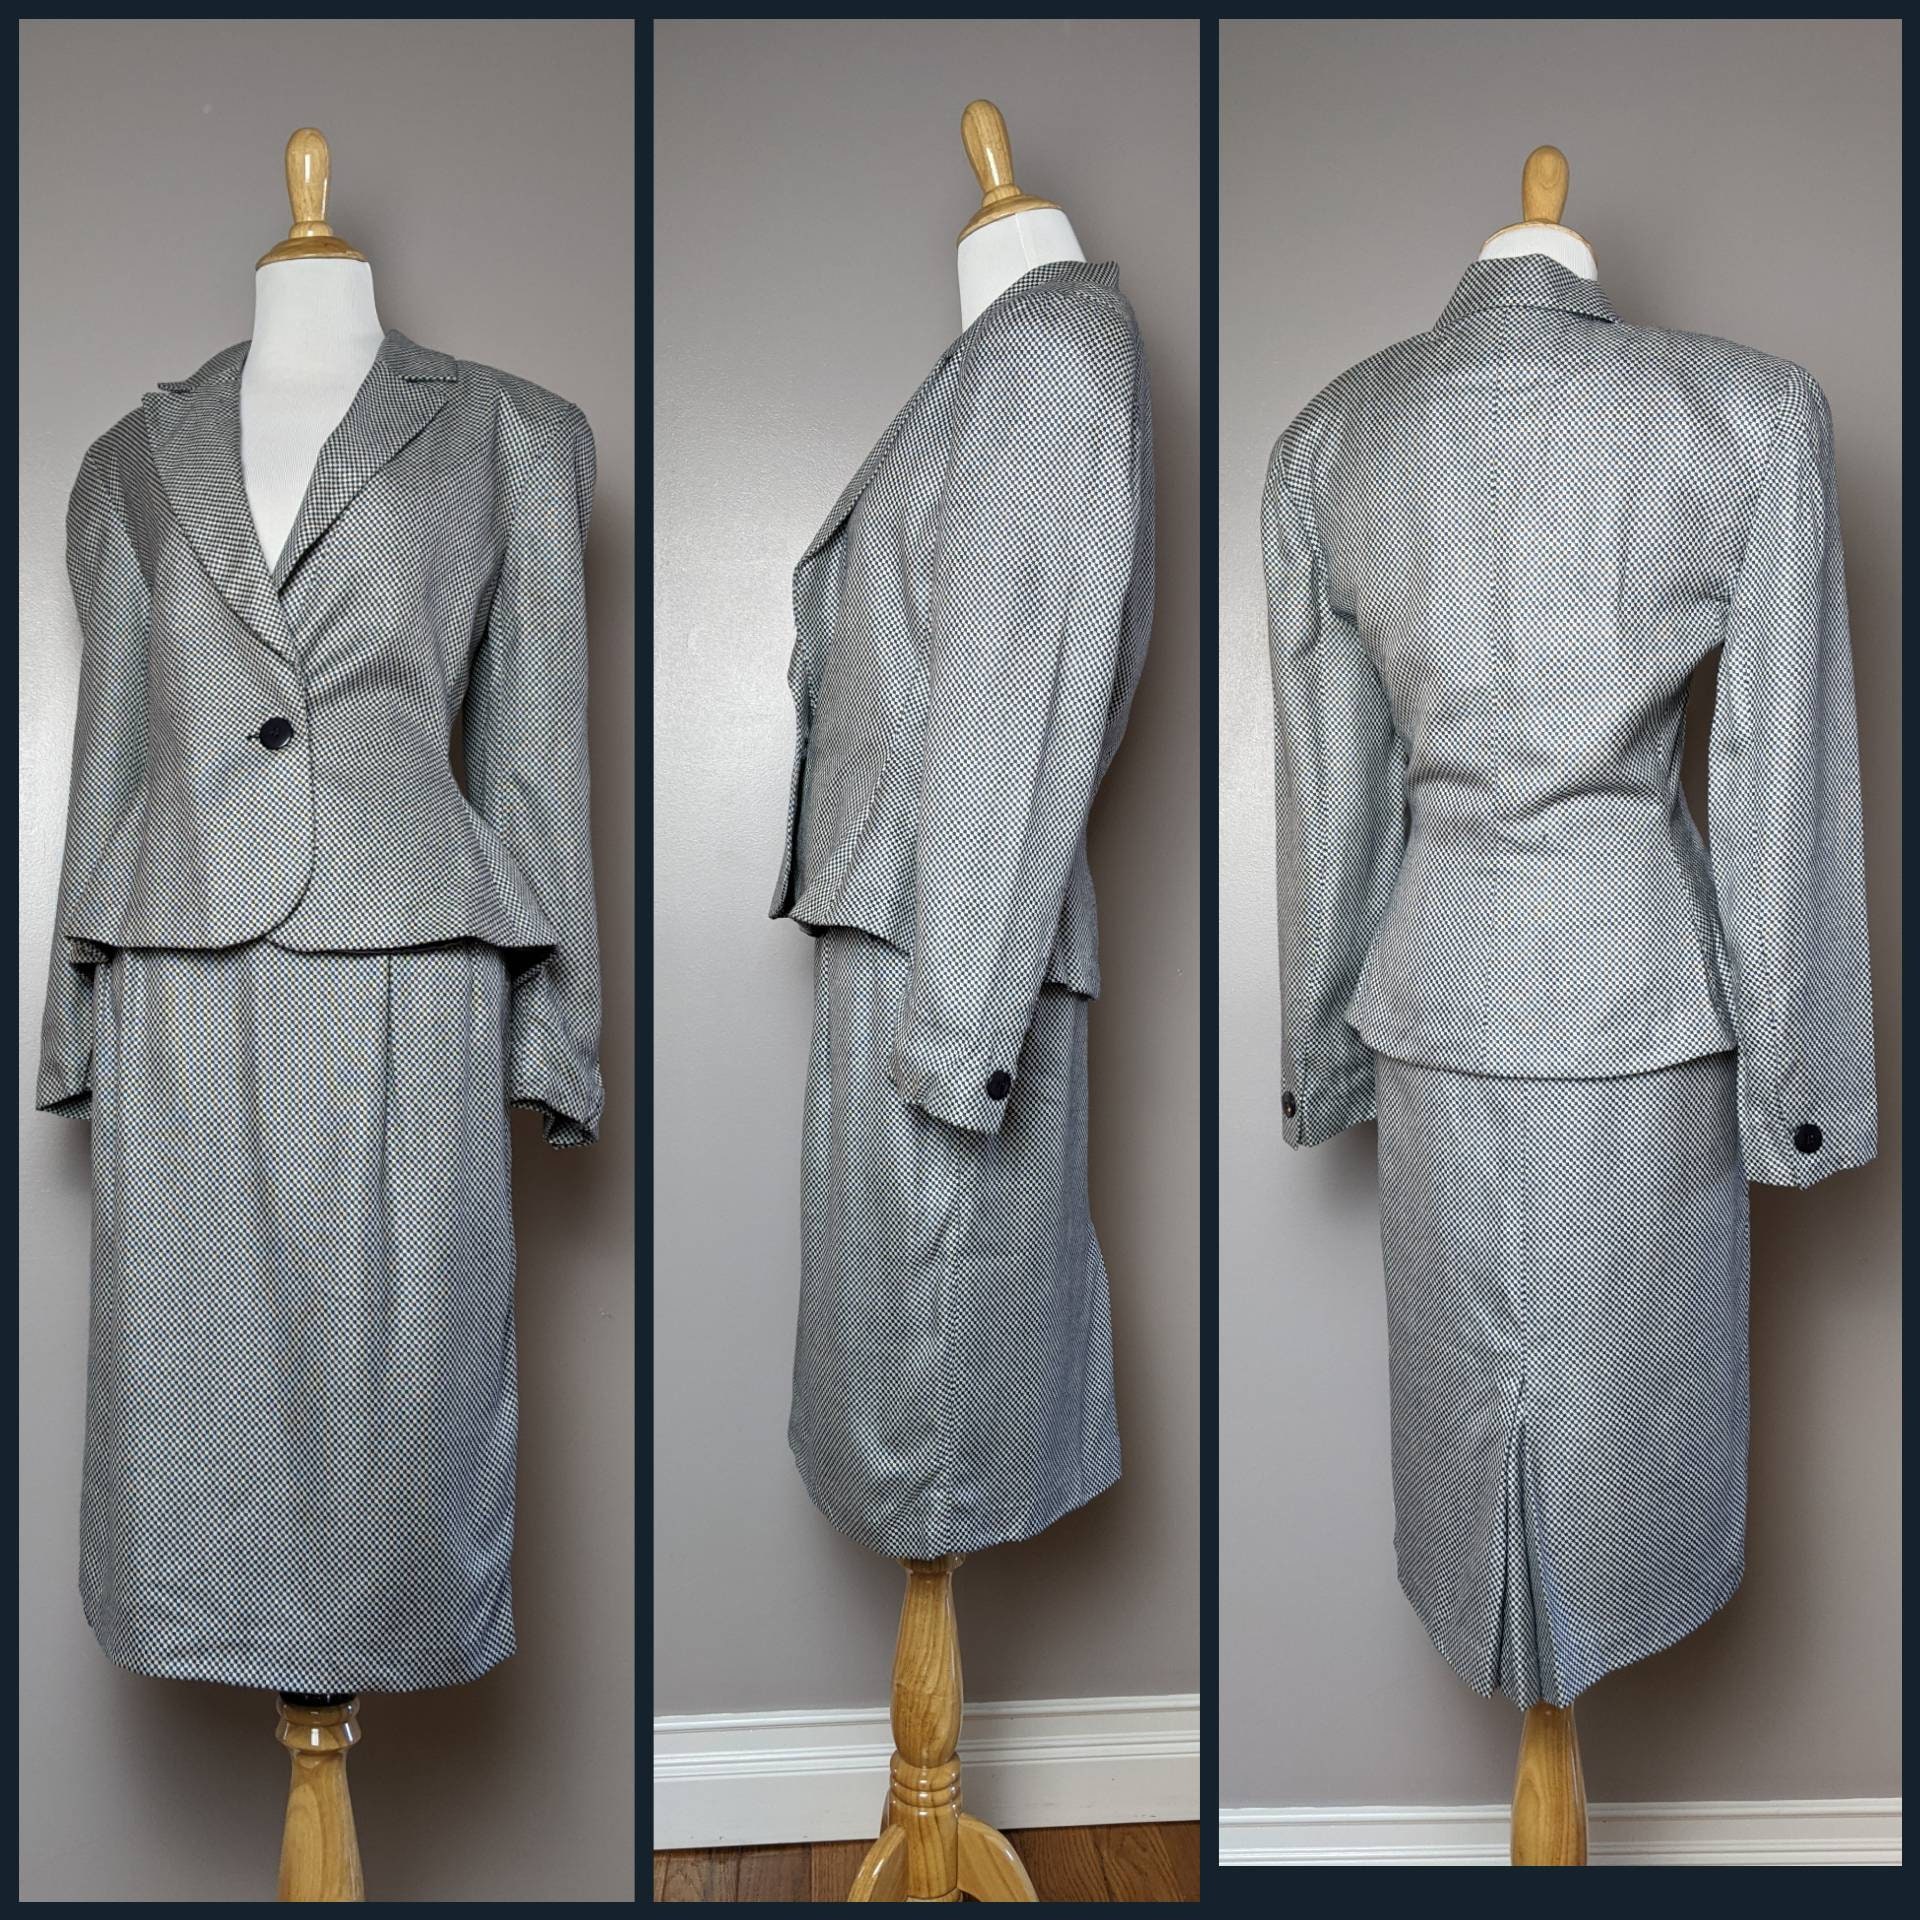 Vintage 80s Christian Dior Navy Blue and White Hounds Tooth Tweed Power Suit  Career Suit Set 